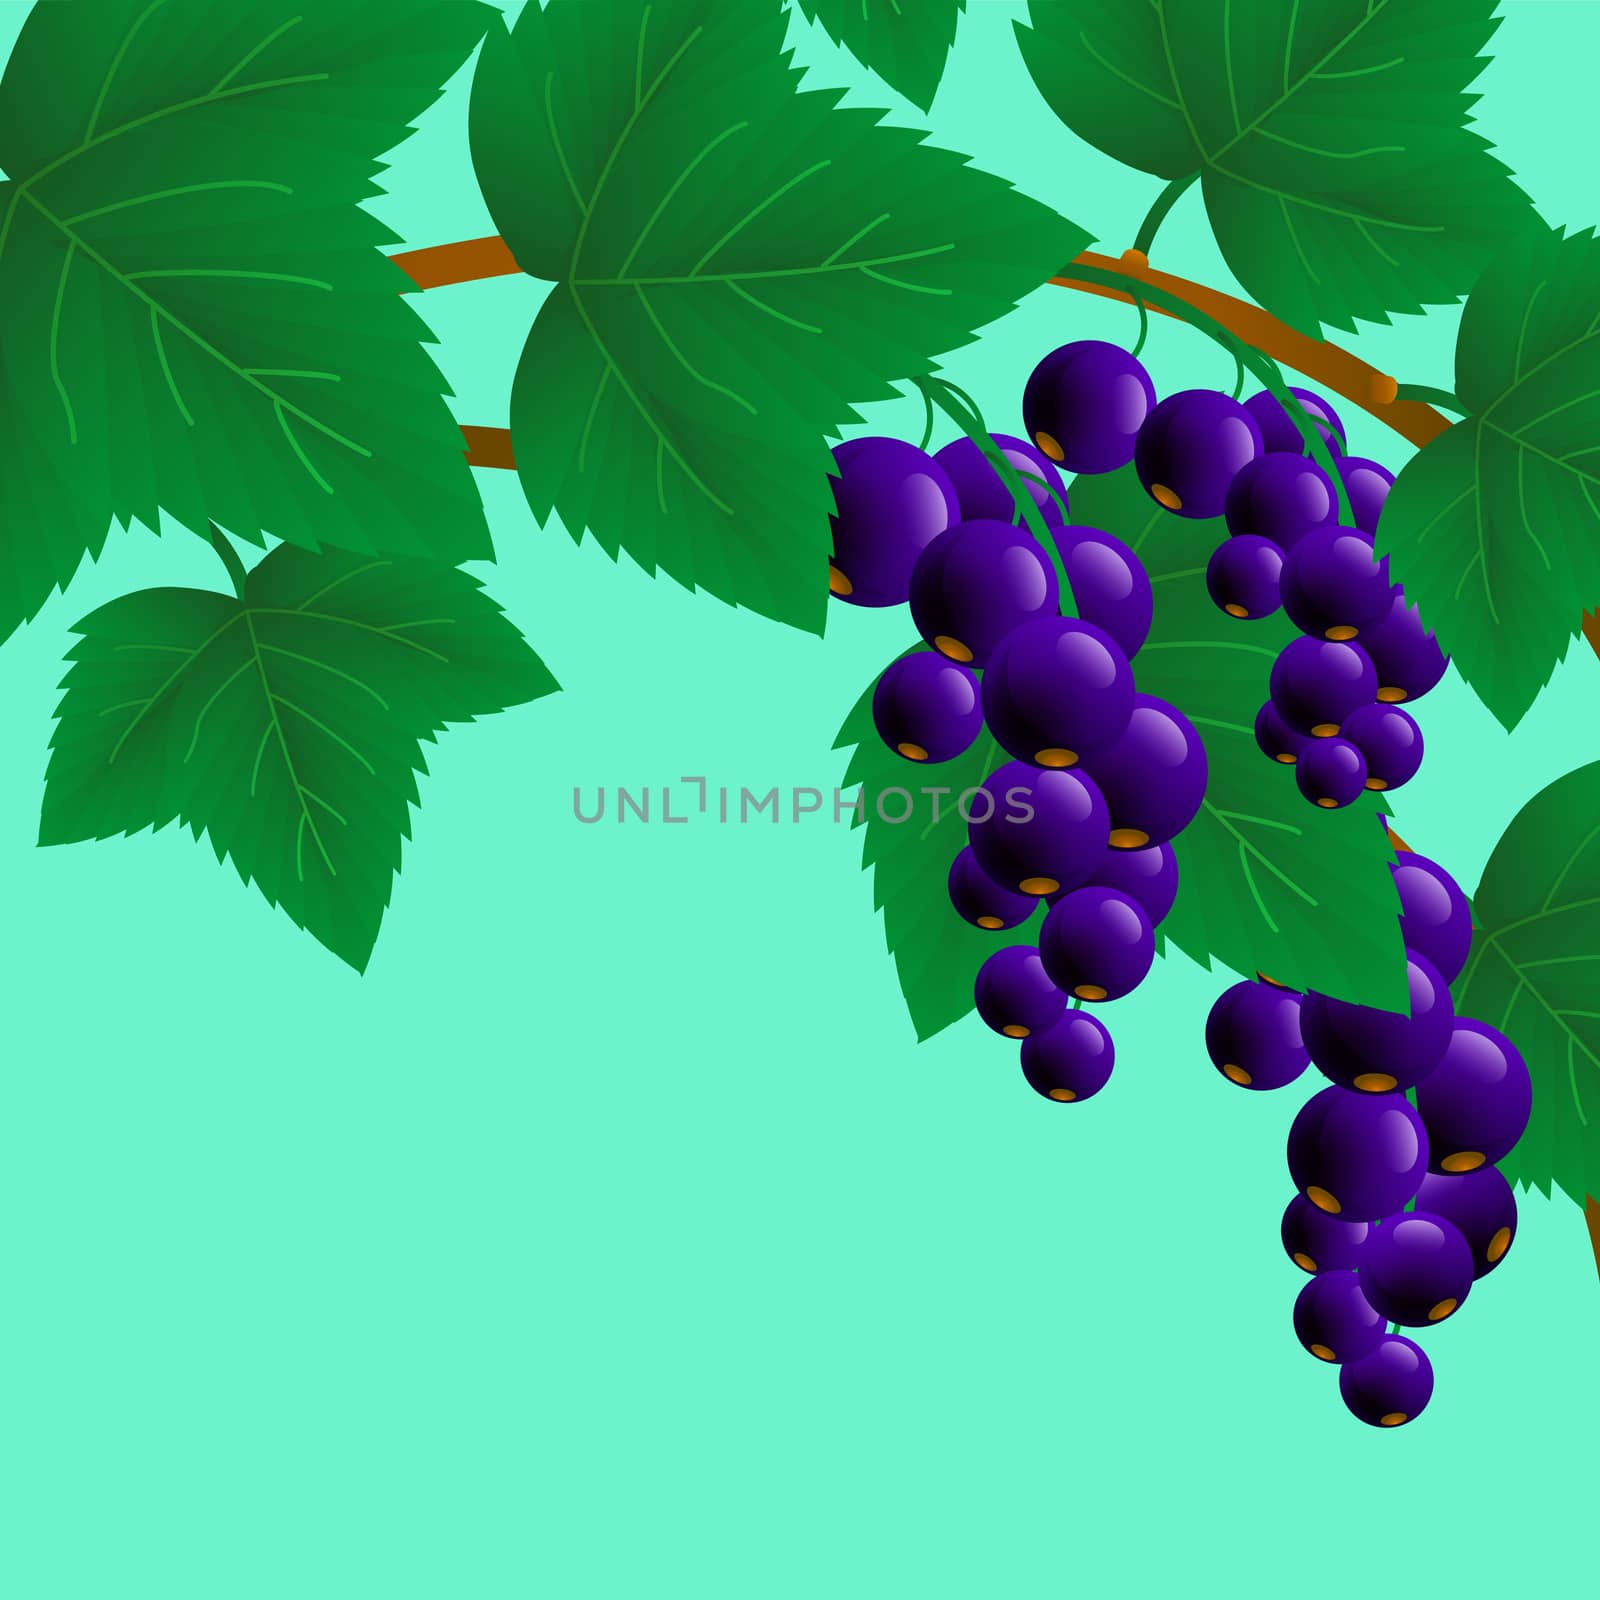 black, juicy, sweet currant on a branch for your design. illustration